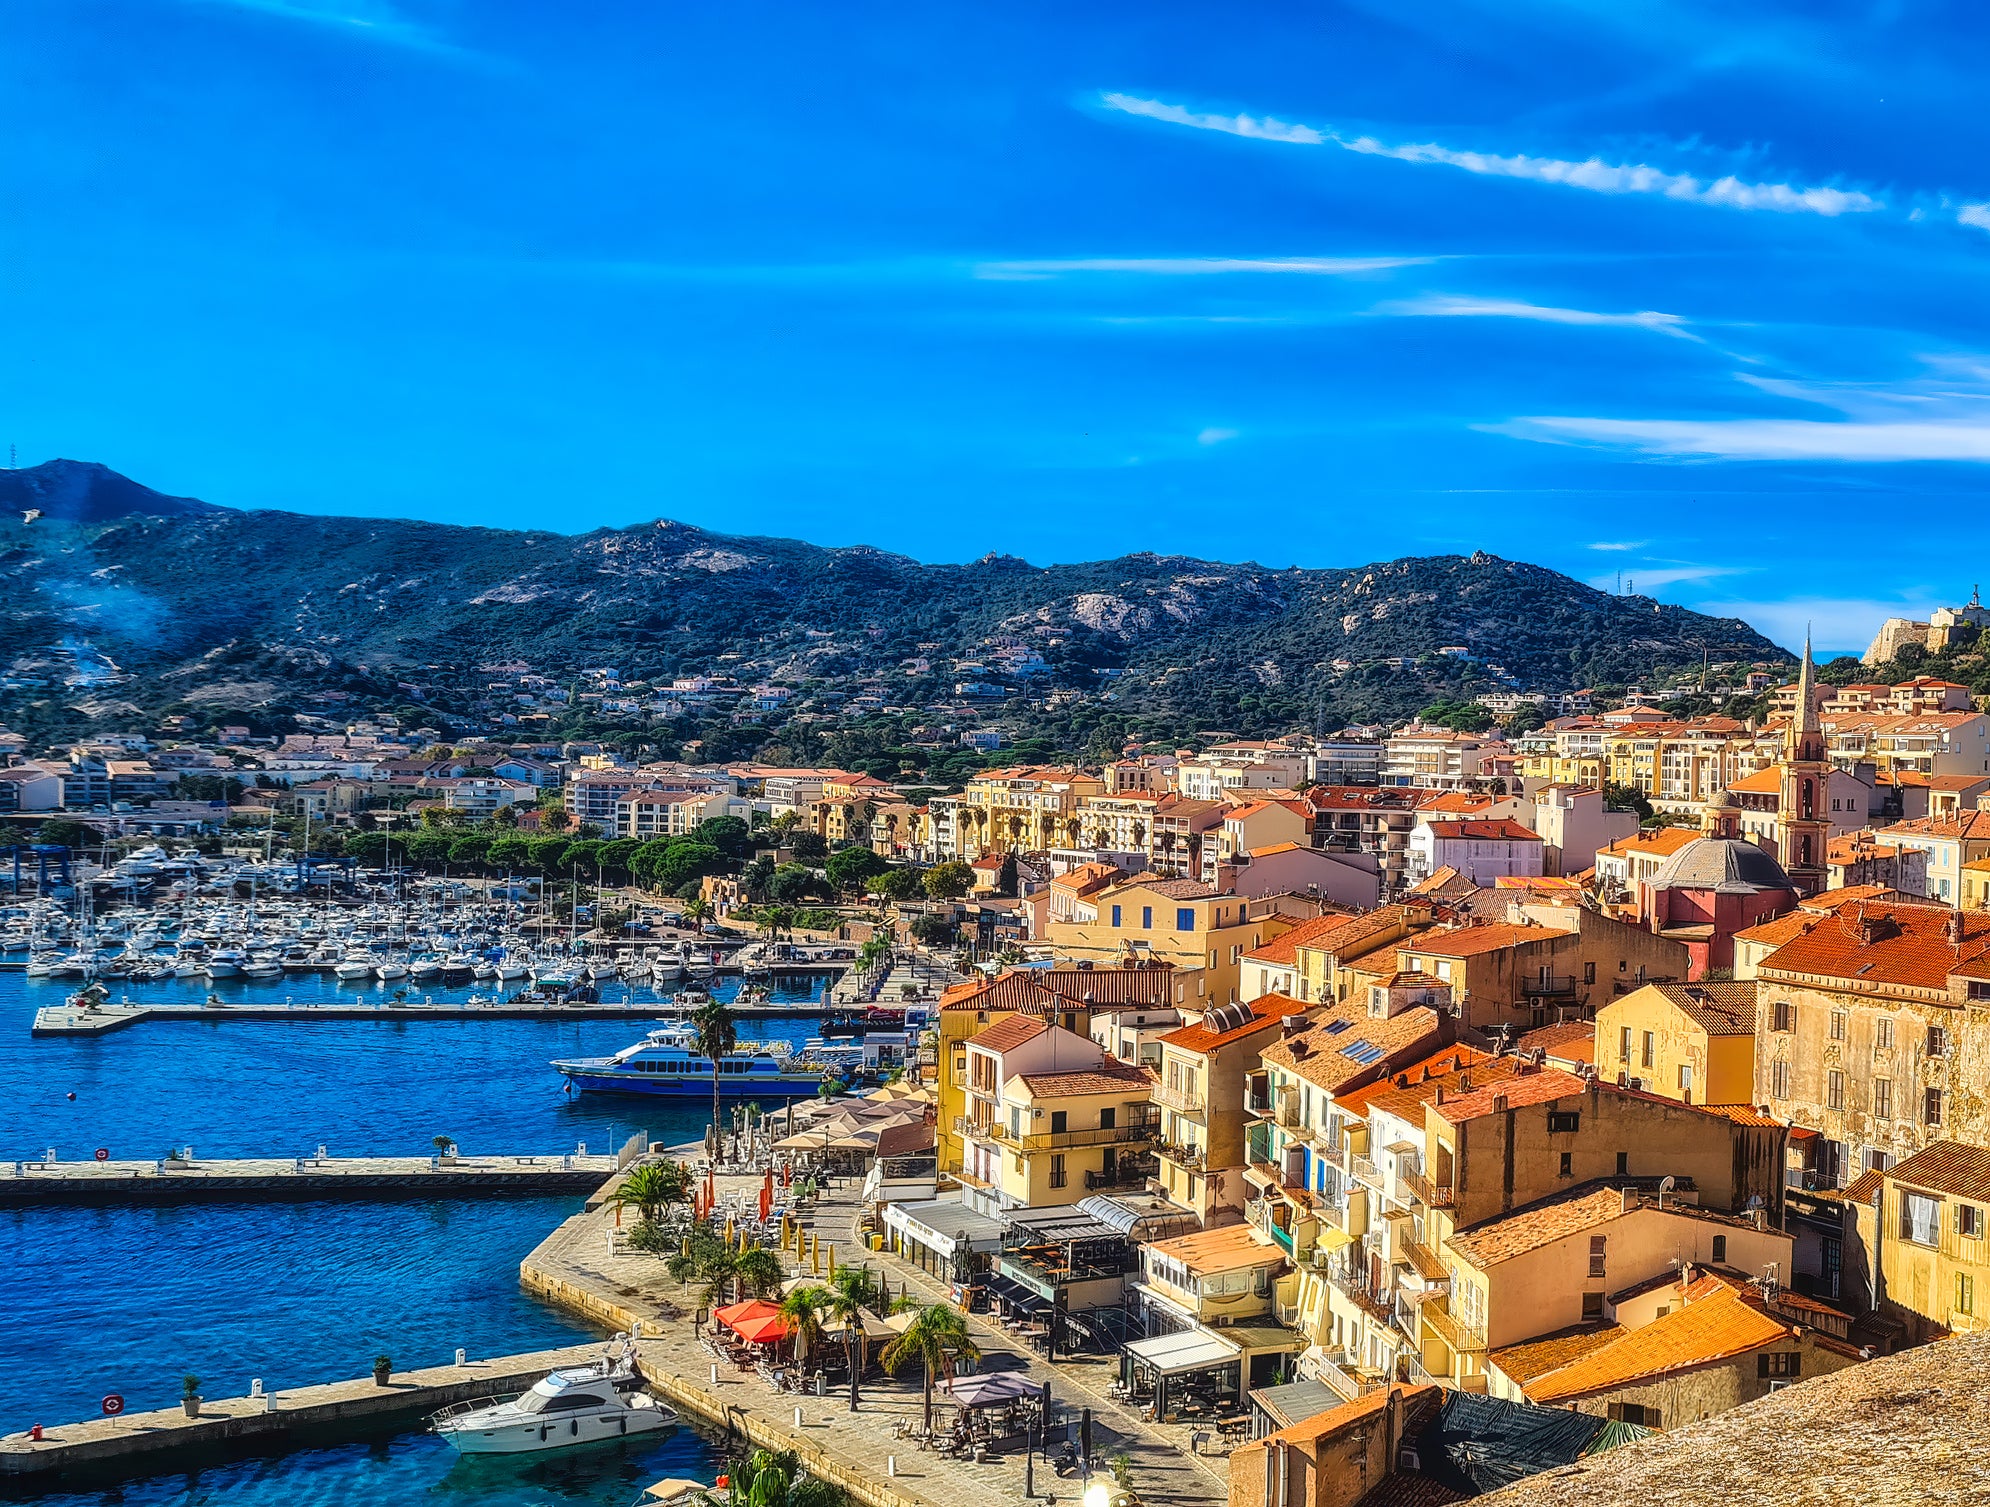 Spend time this September in the port town of Calvi, Corsica